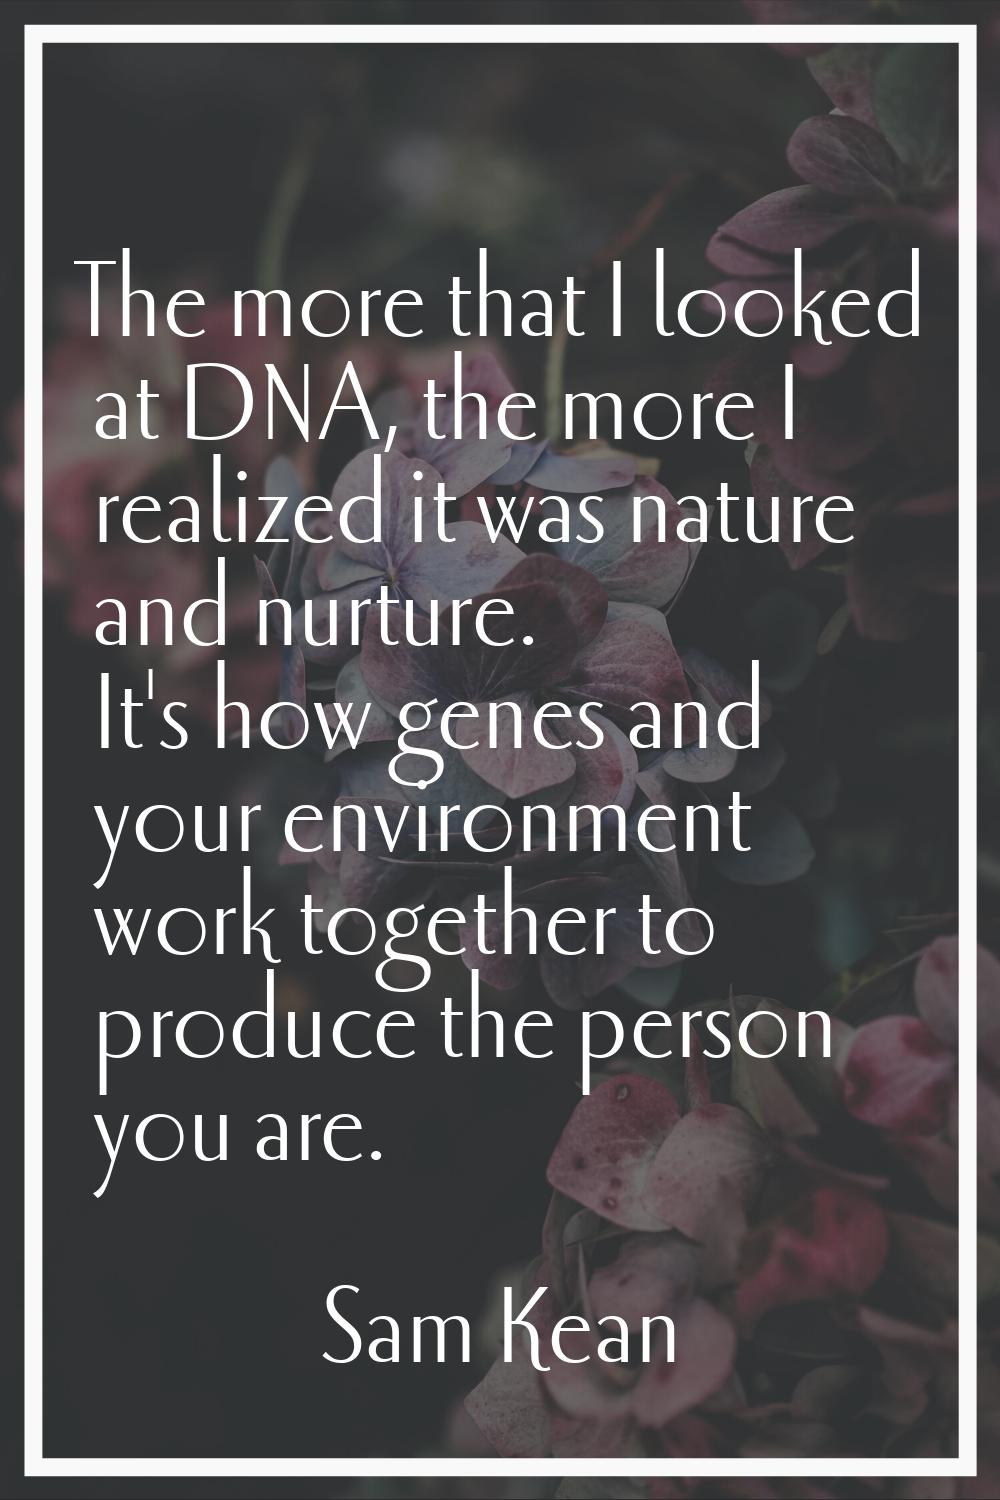 The more that I looked at DNA, the more I realized it was nature and nurture. It's how genes and yo